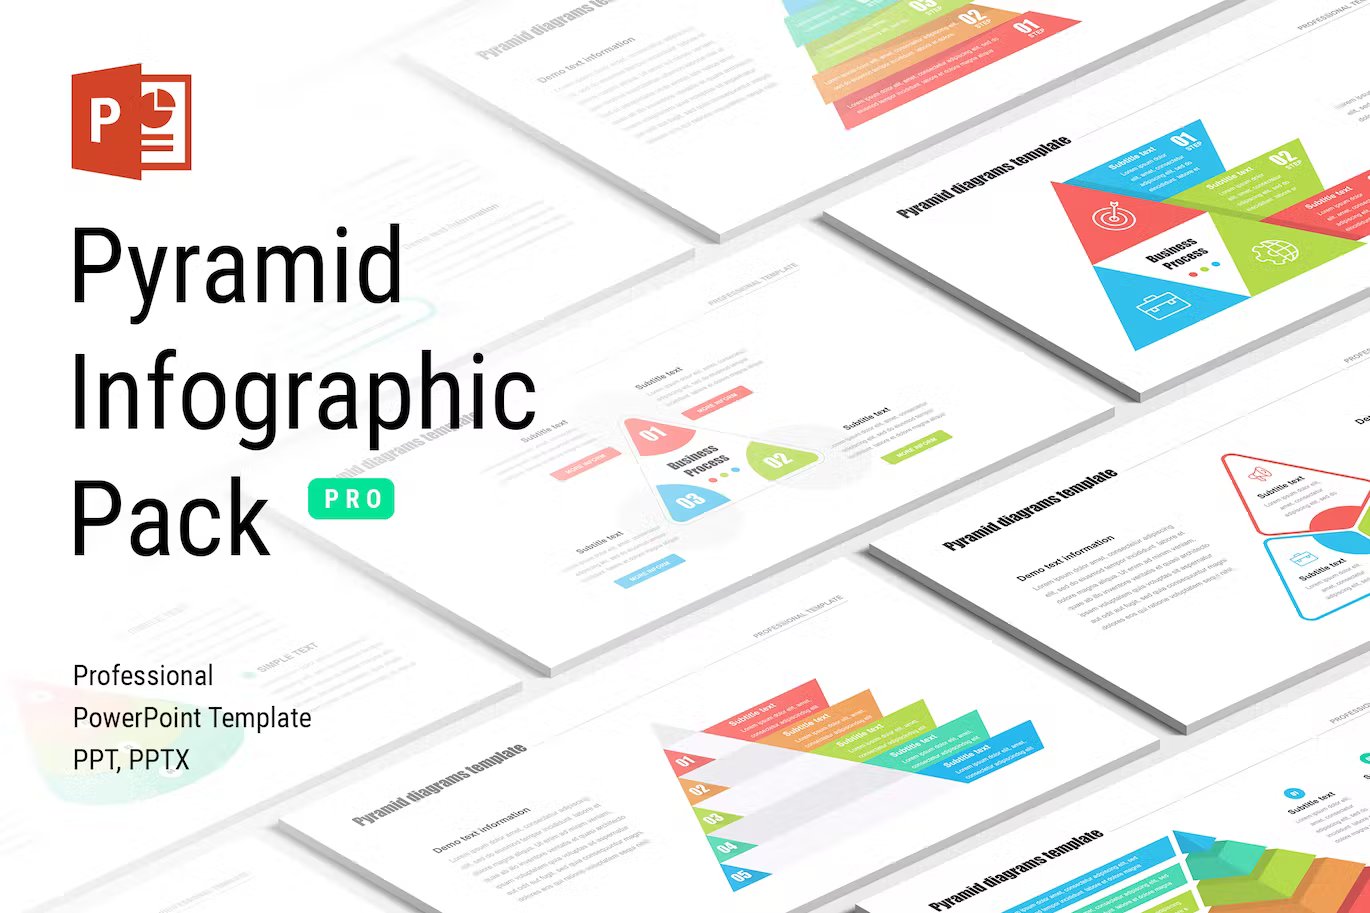 Black lettering "Pyramid Infographic Pack" on the background of different presentation templates.